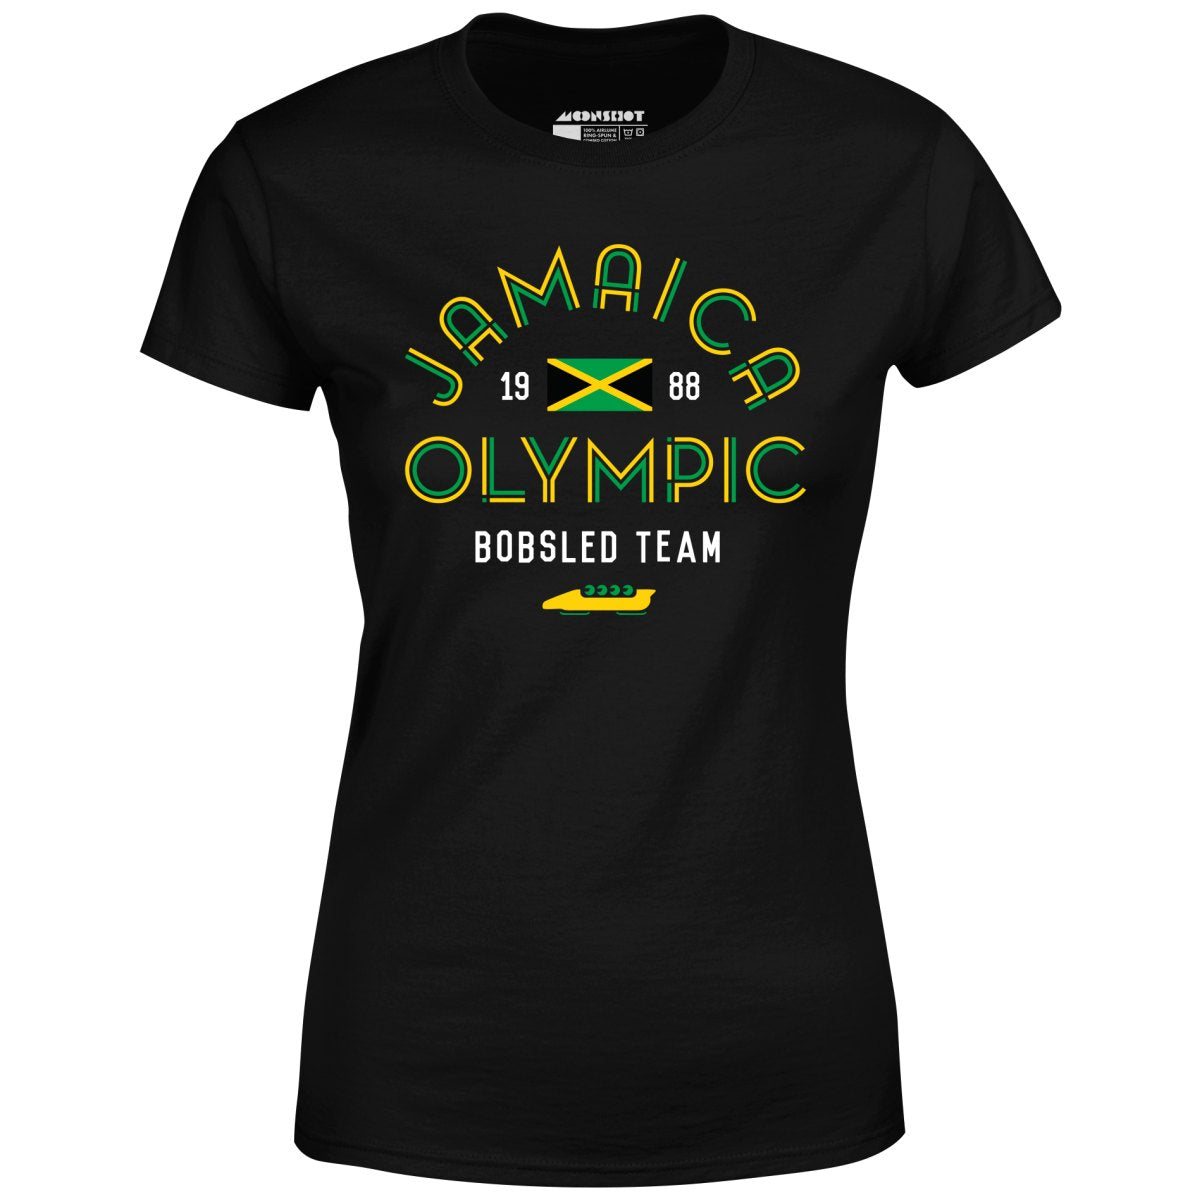 1988 Jamaica Olympic Bobsled Team - Women's T-Shirt